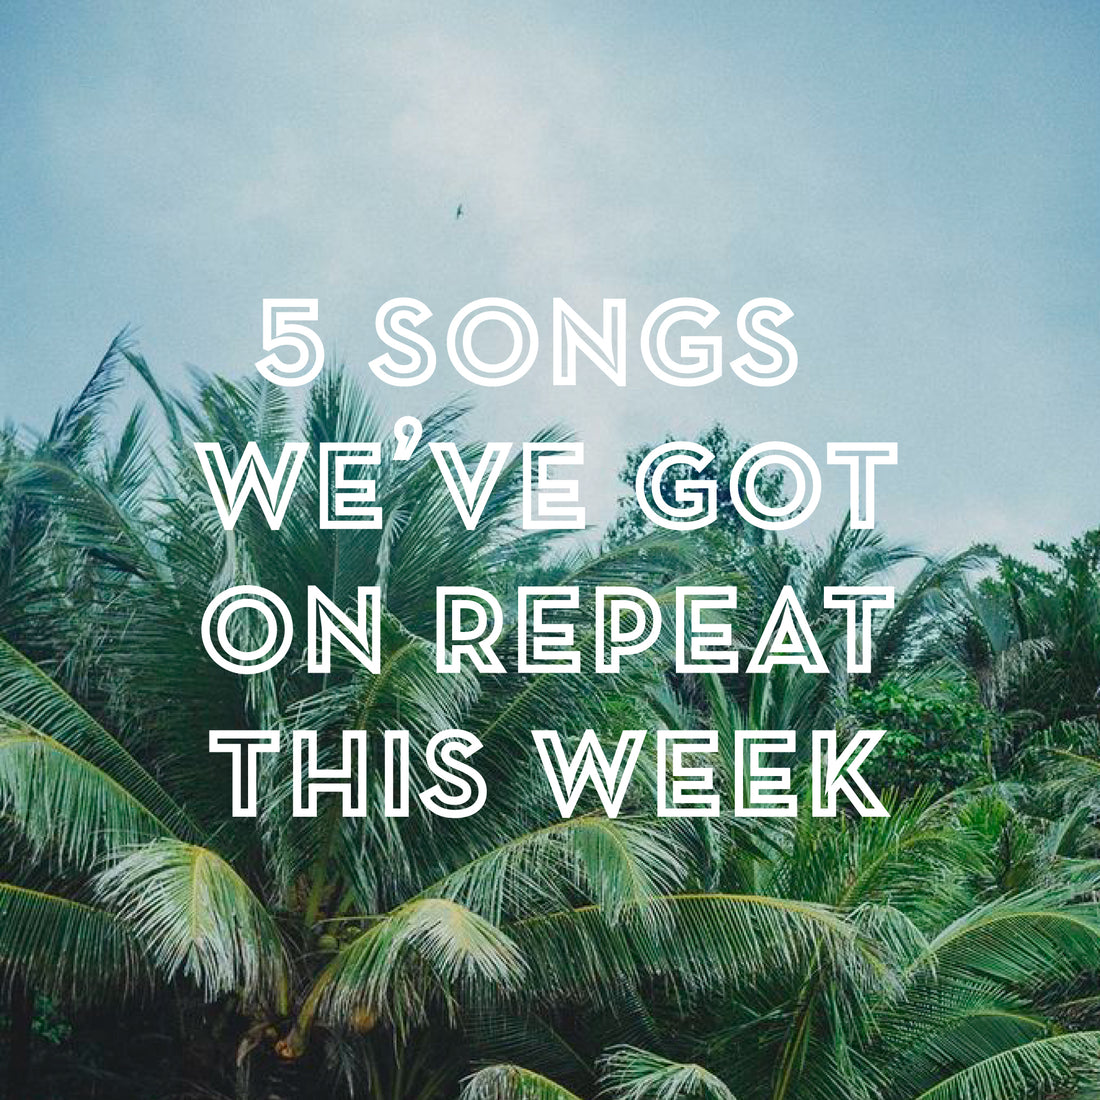 5 Songs we've got on repeat this week from our global music mix tape